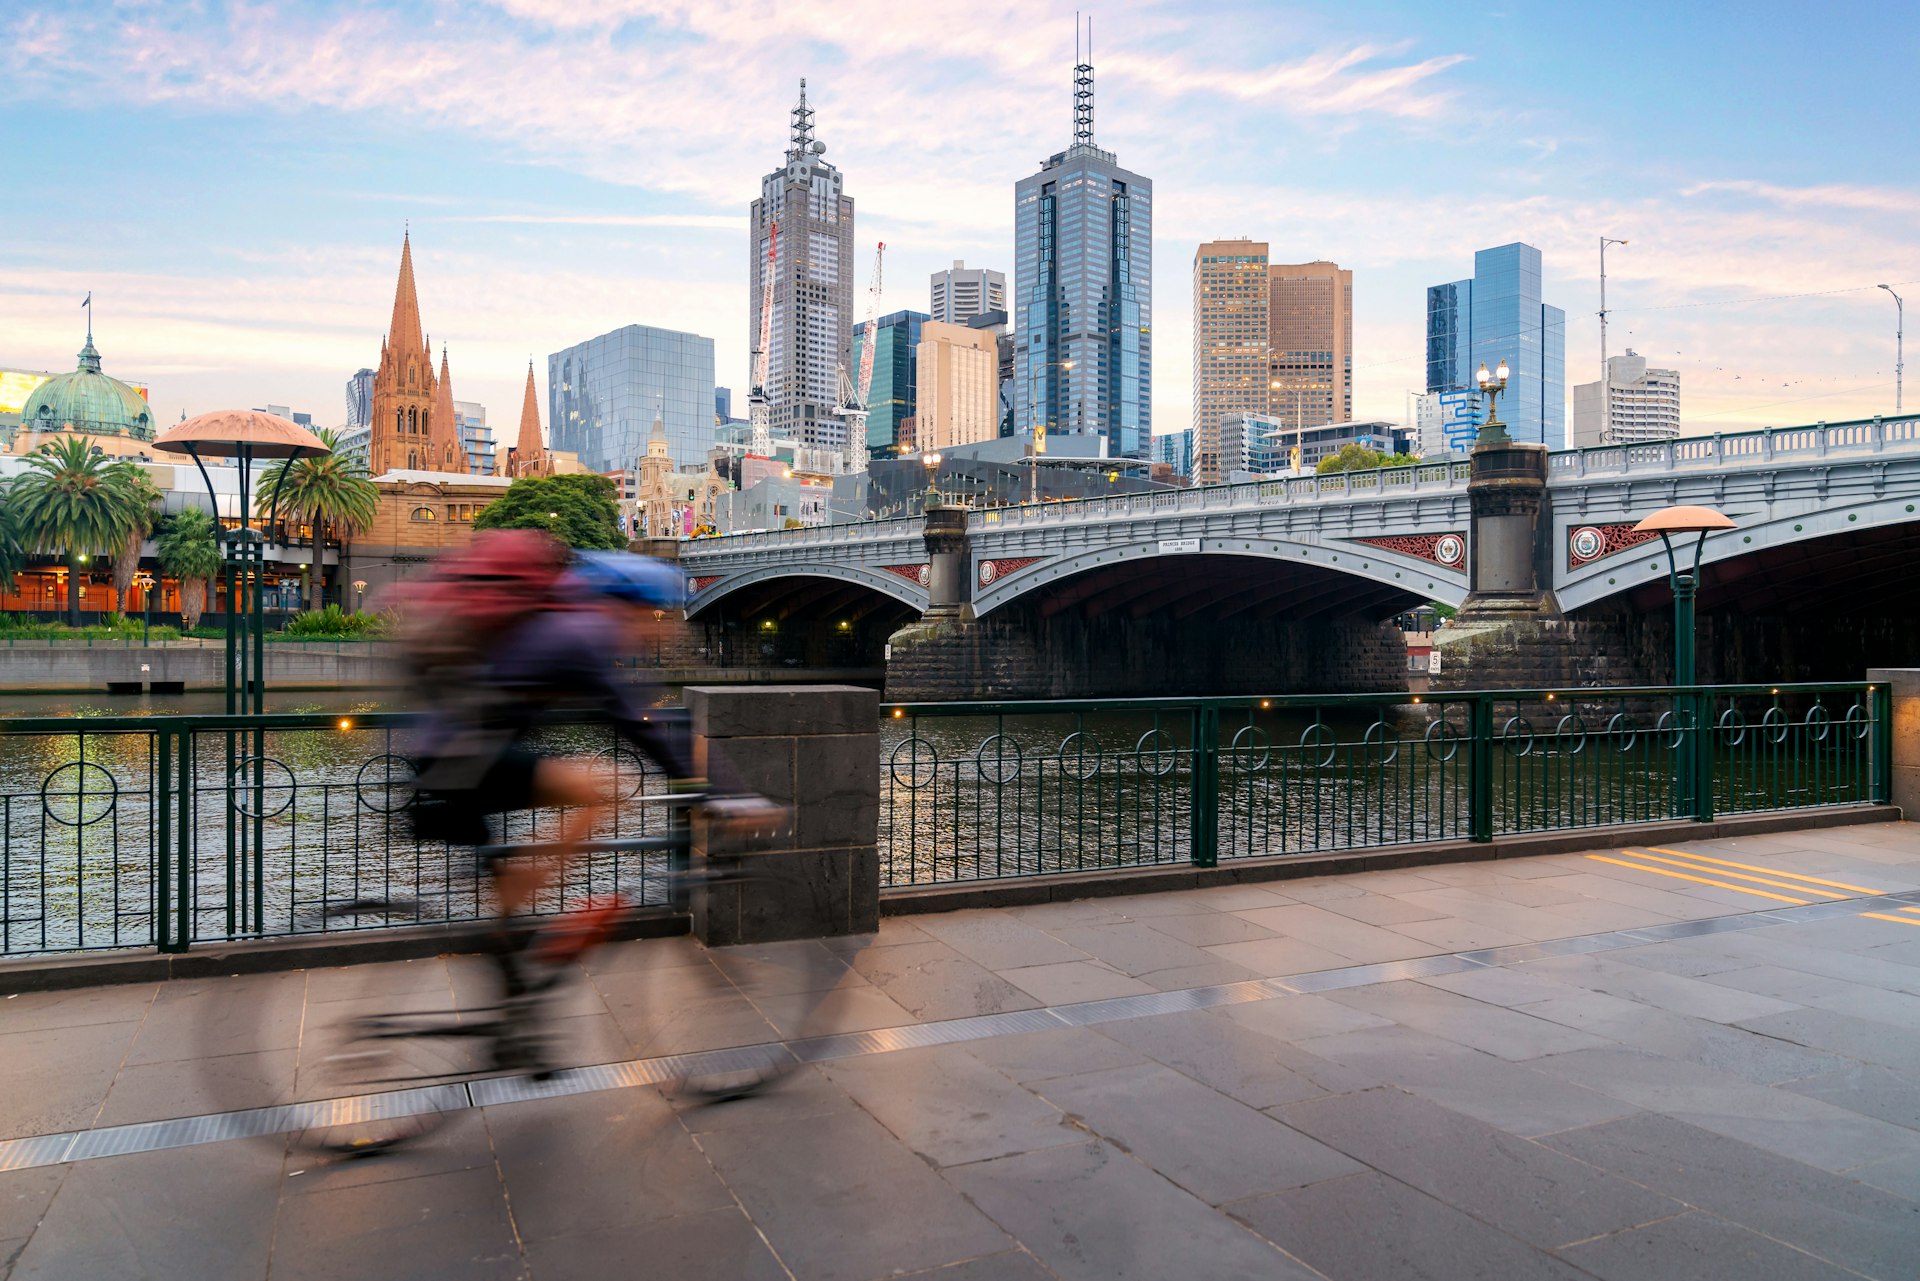 A man cycles next to the Yarra River in Melbourne, Australia. Across the river, Melbourne's main skyline is visible, with a number of towering skyscrapers.